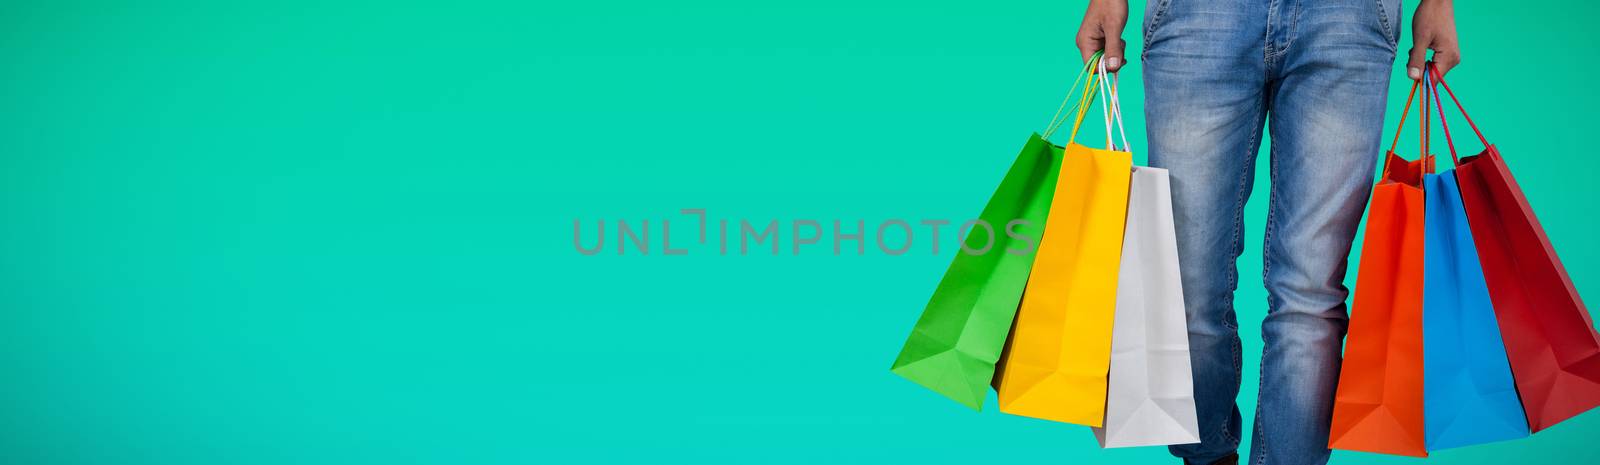 Low section of man carrying colorful shopping bag against white background against abstract green background